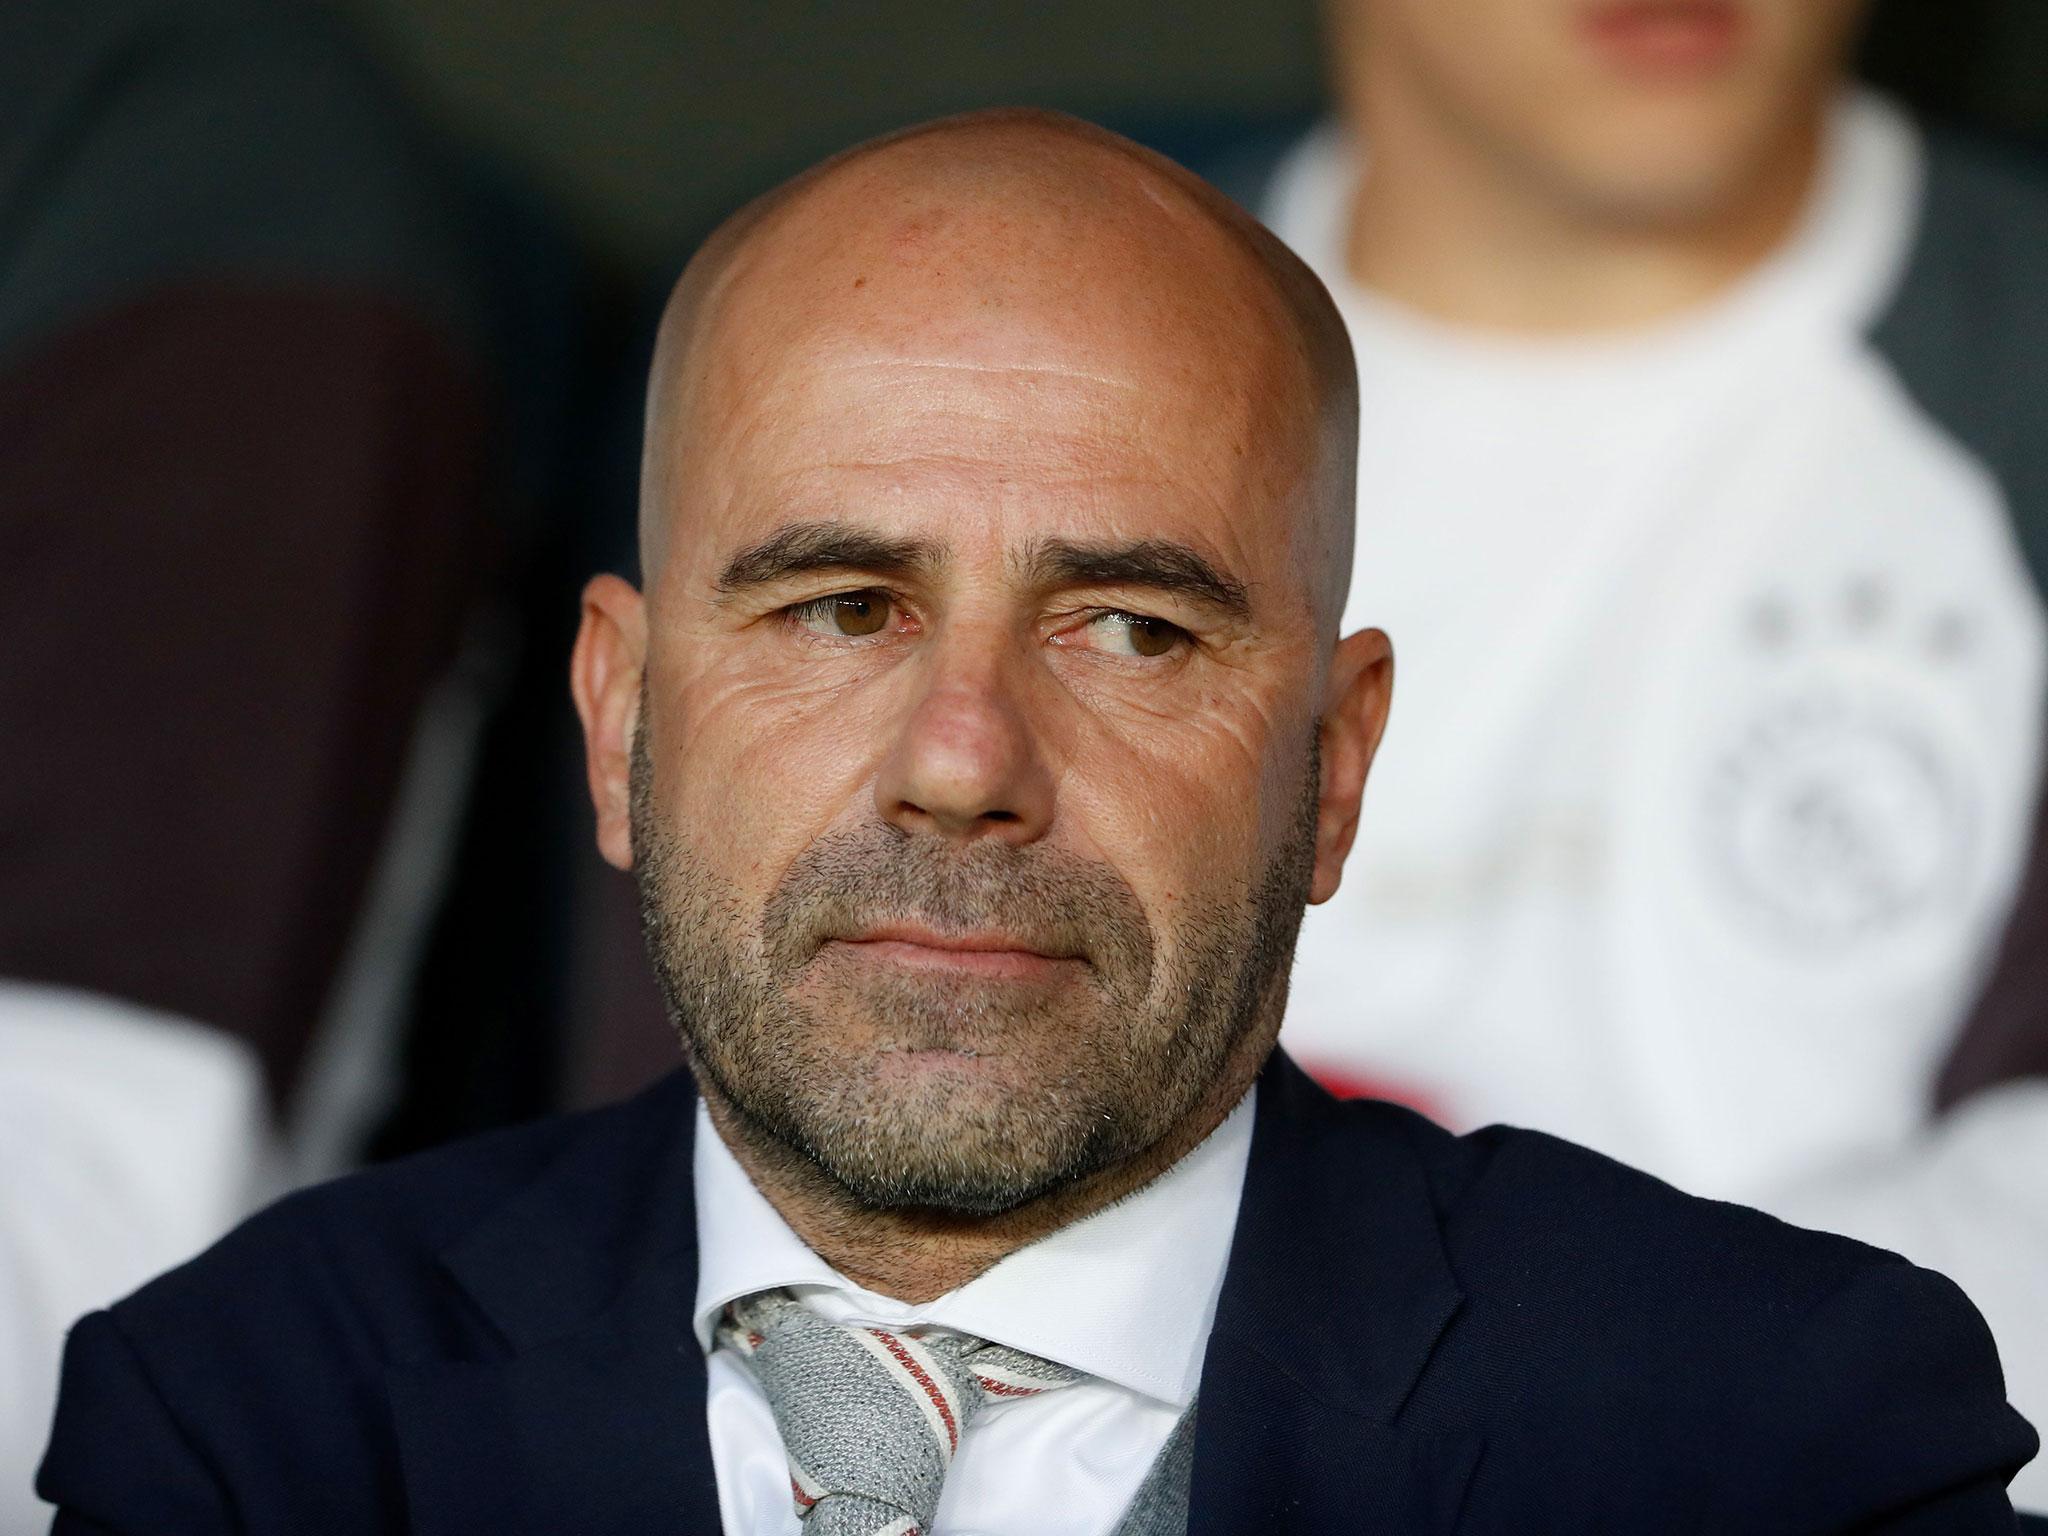 Peter Bosz has signed a two-year contract at the German side